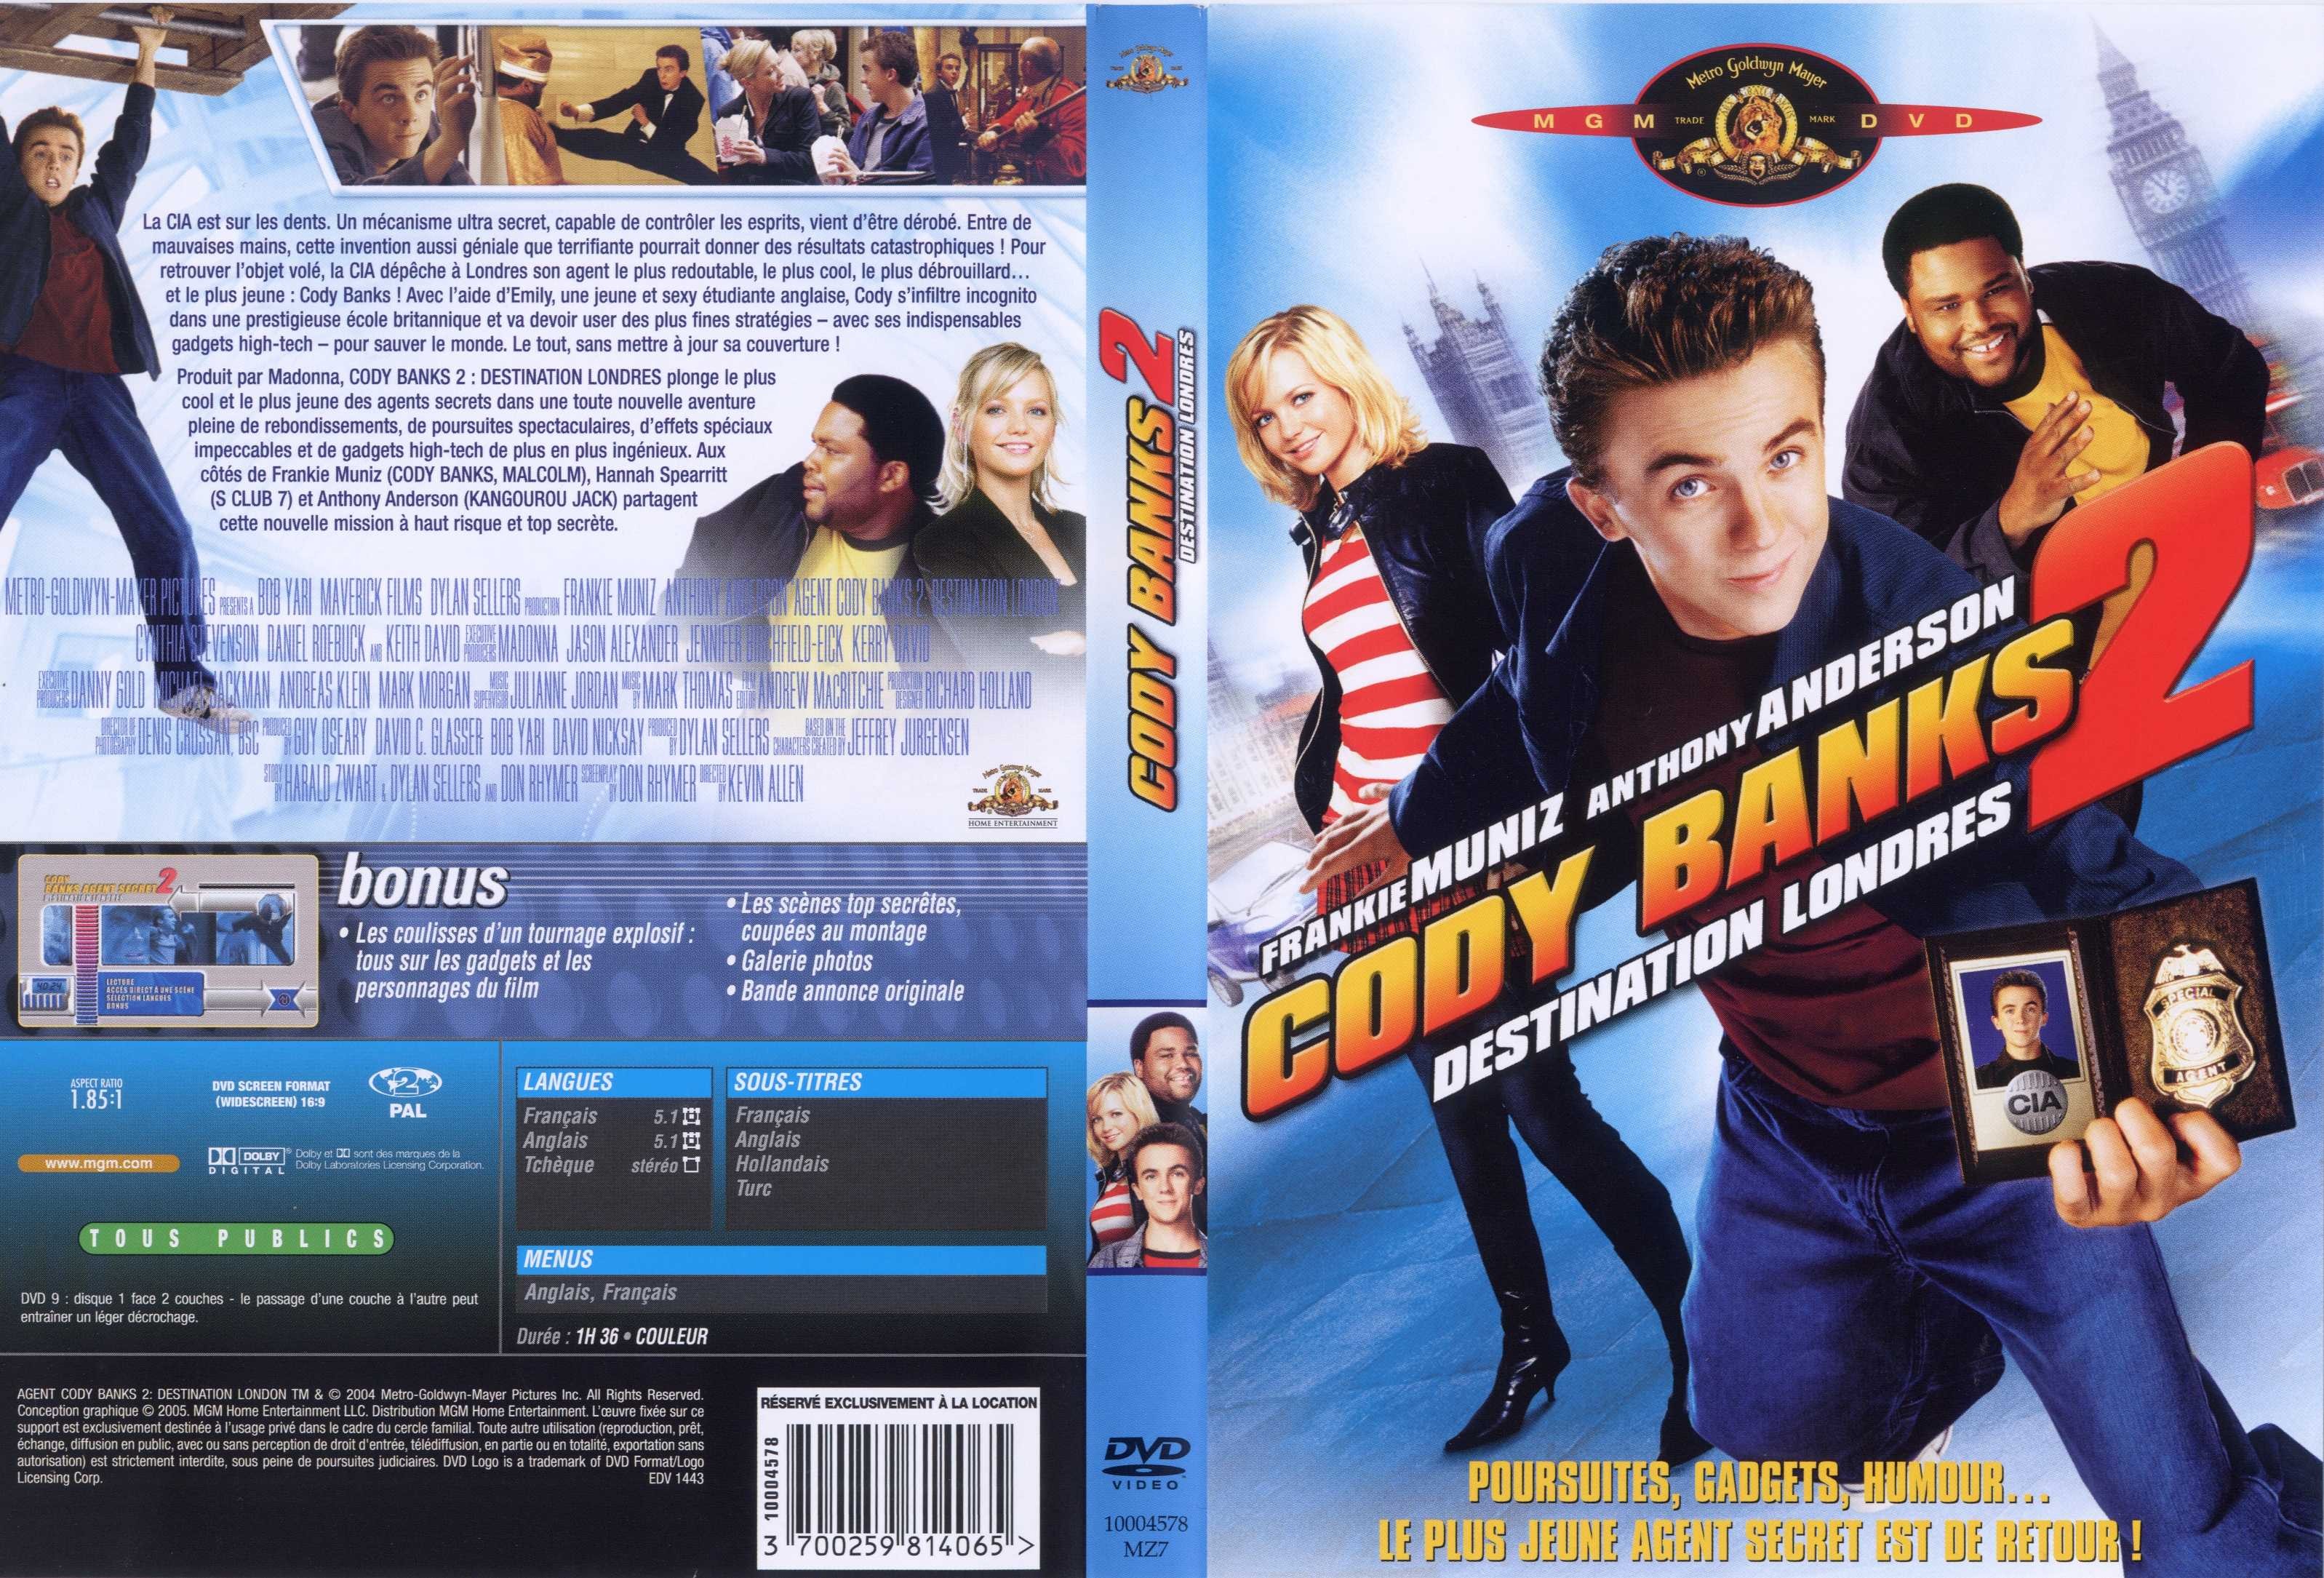 Jaquette DVD Cody Banks 2